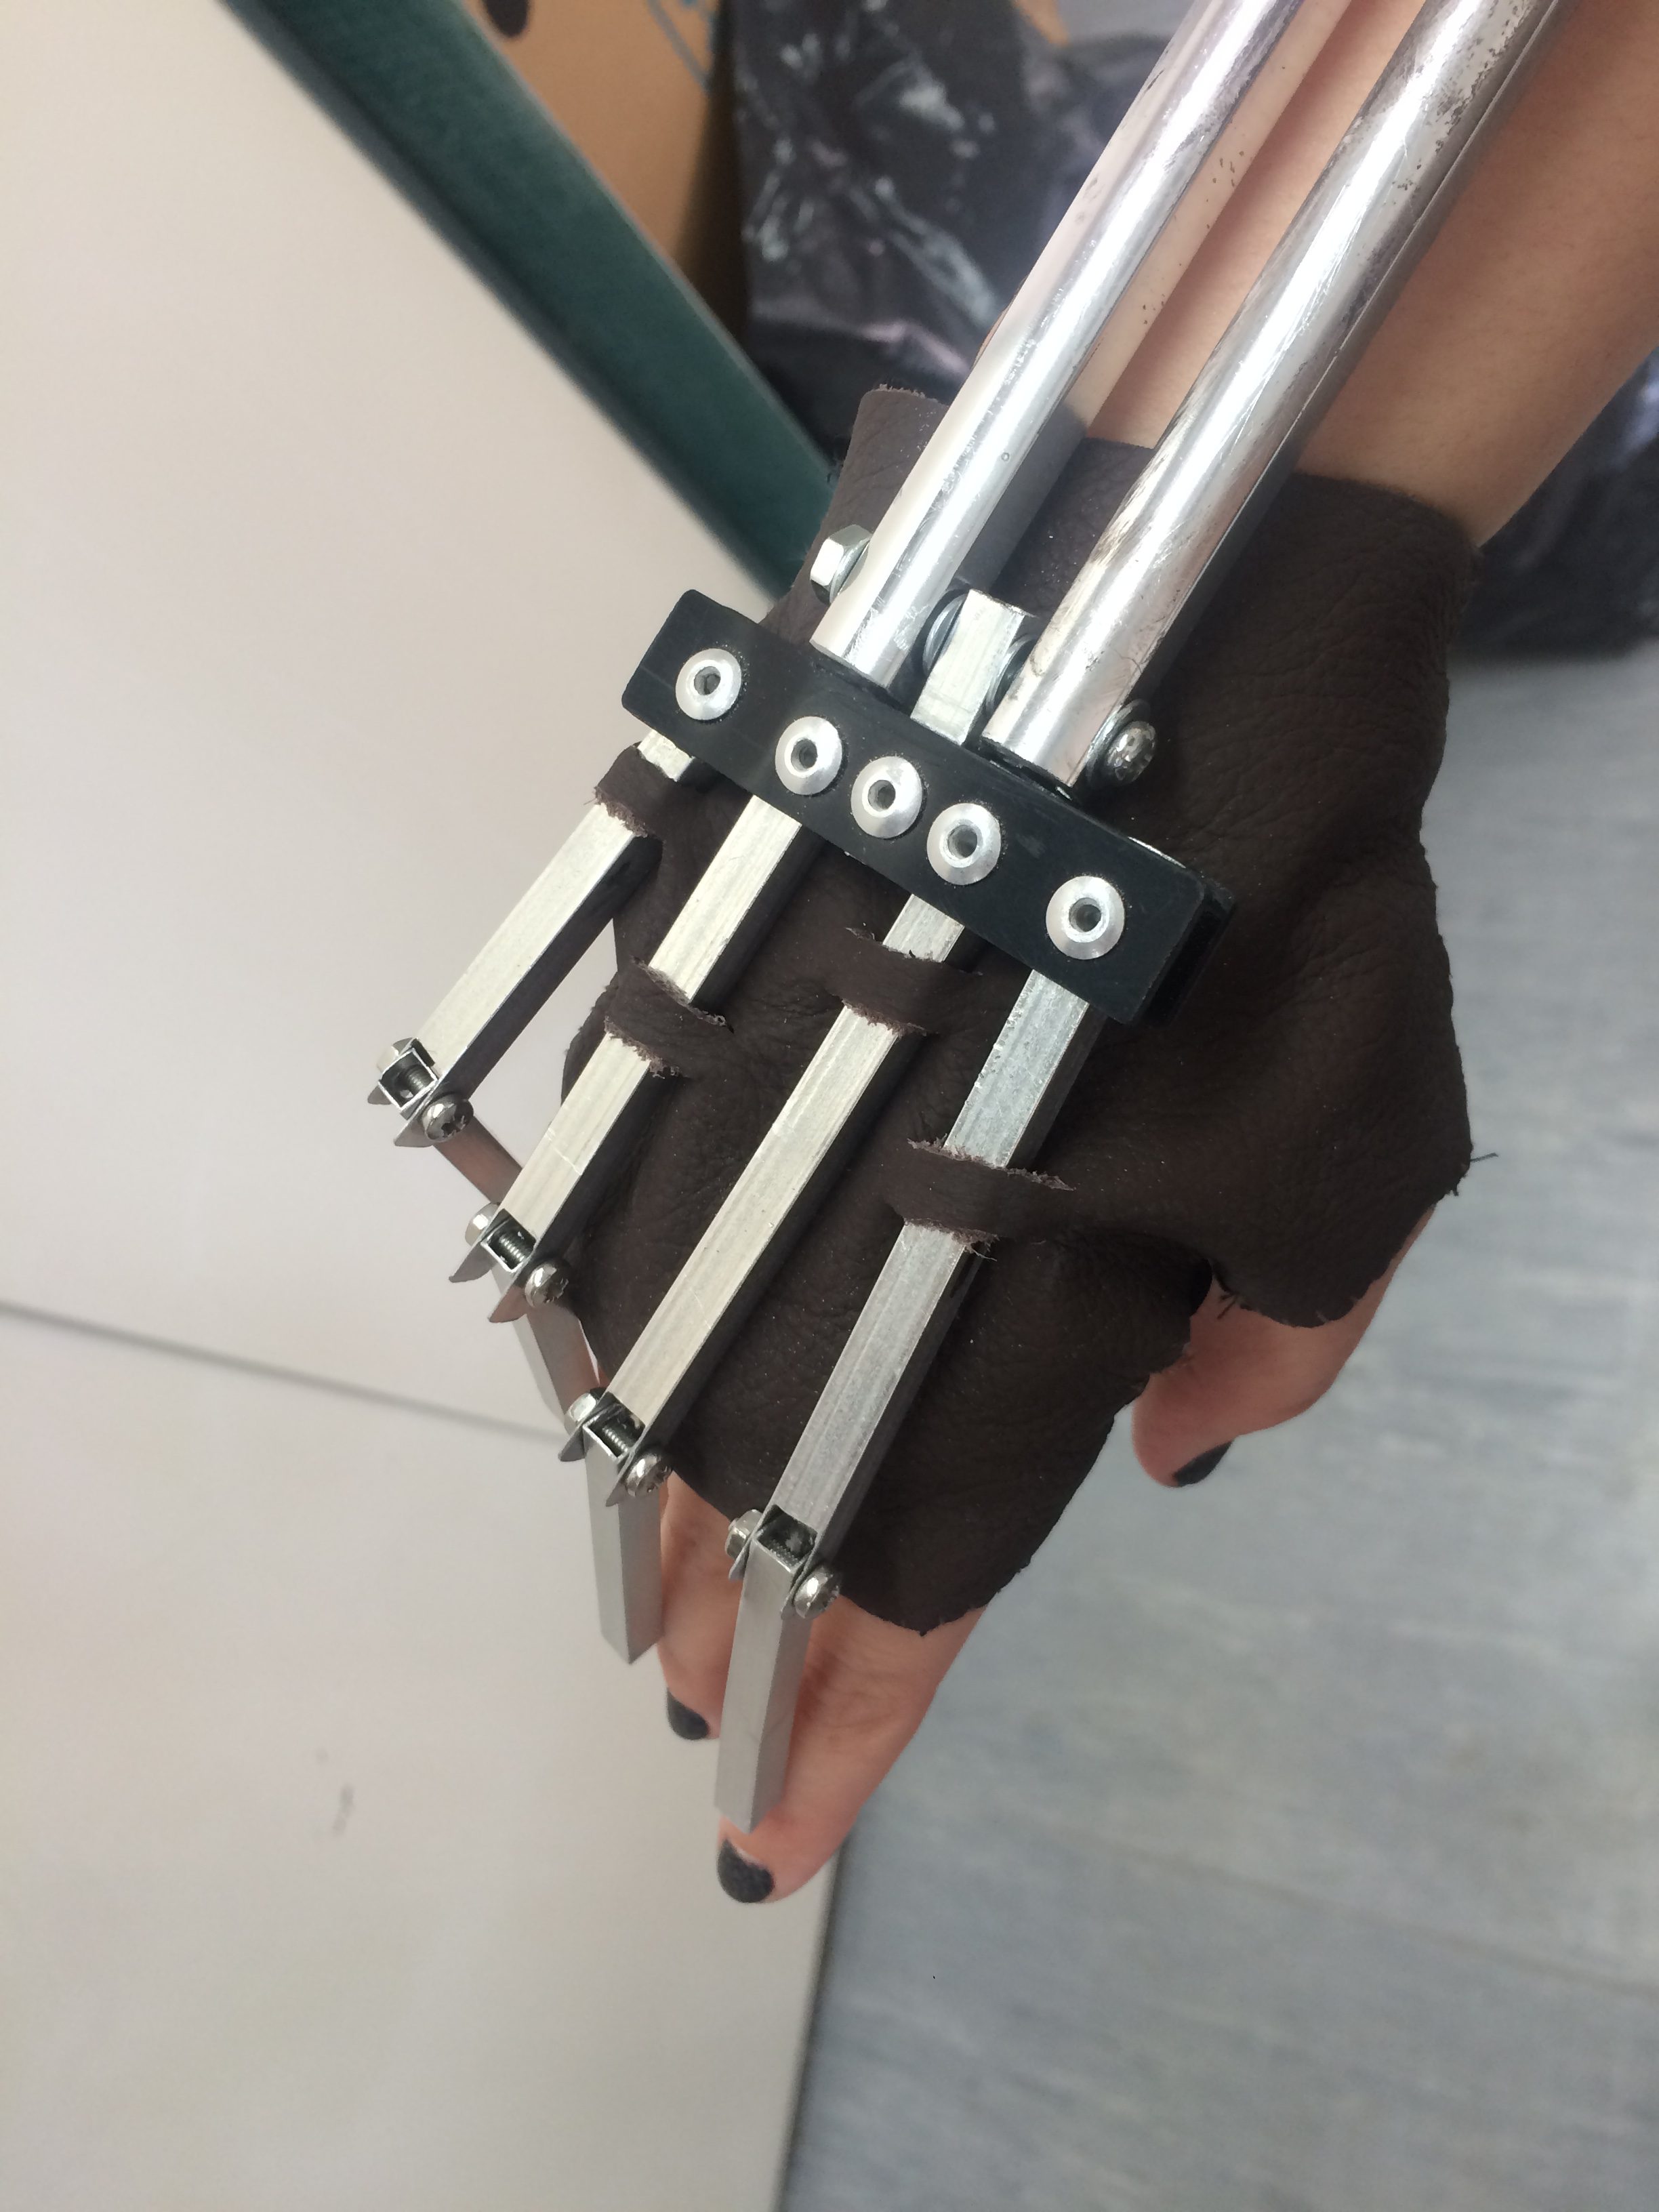 Leather glove with aluminium riveted hinged hand brace